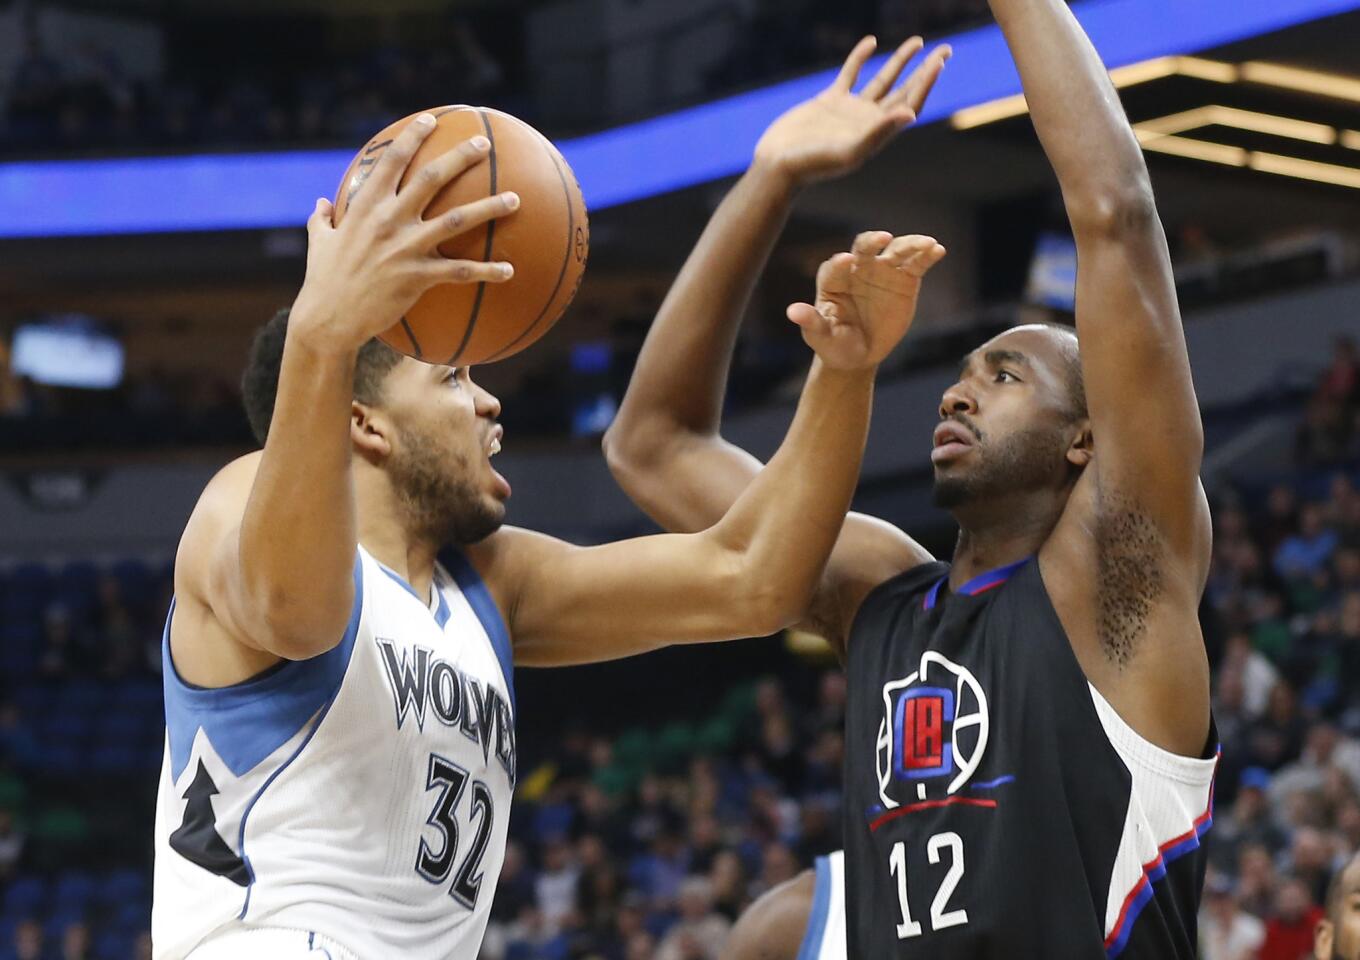 Luc Mbah a Moute, Karl-Anthony Towns